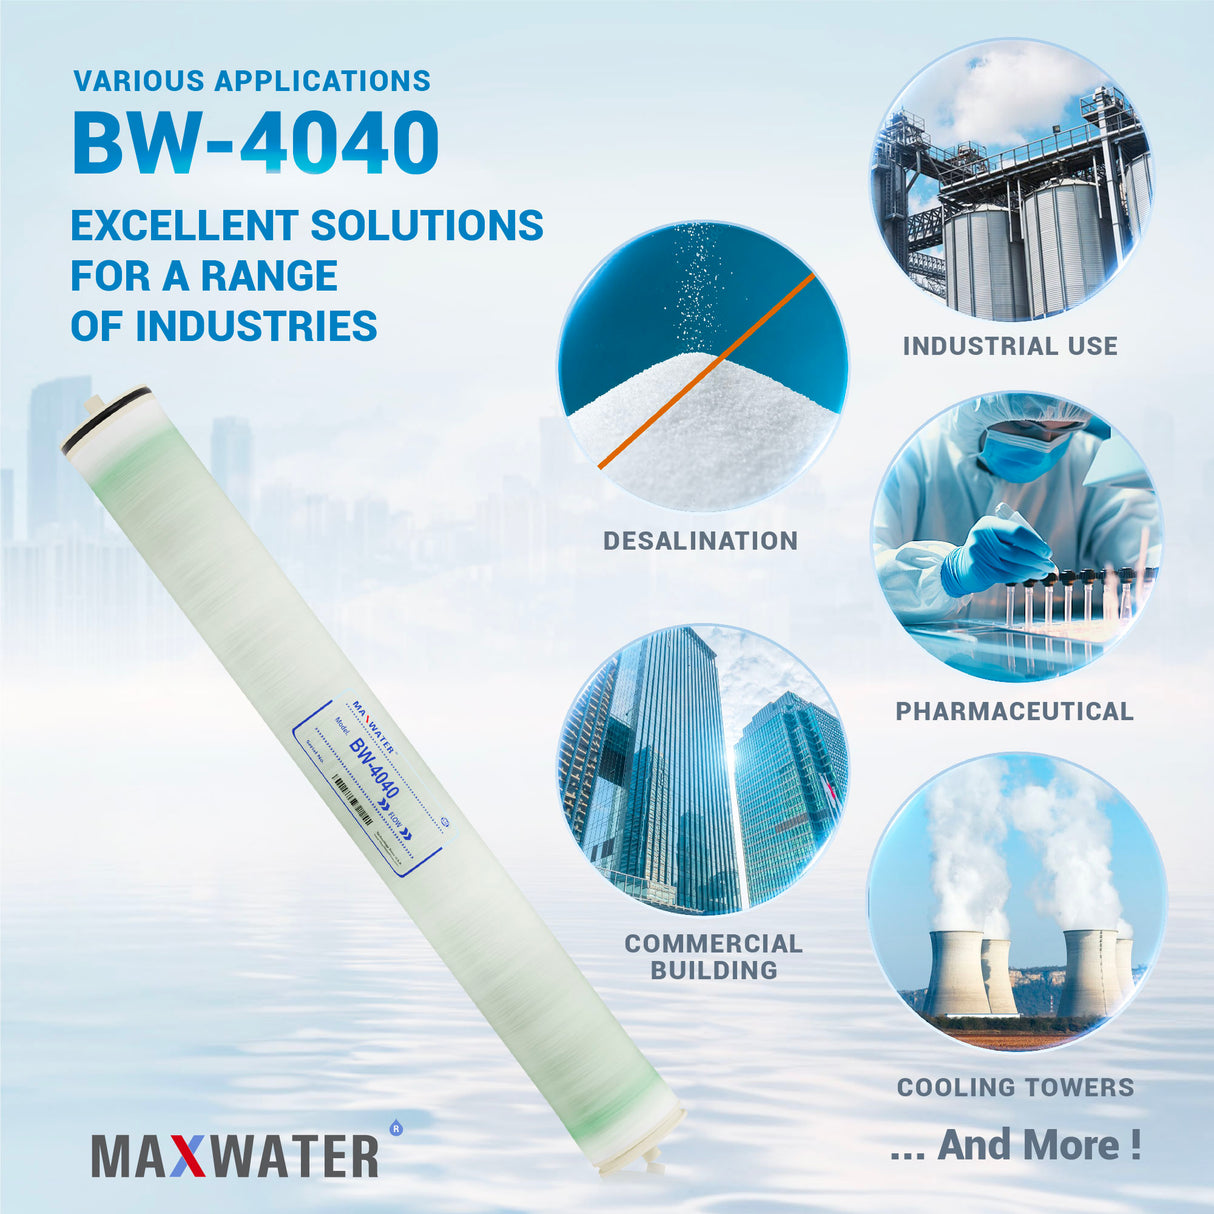 Reliable 4040 RO membrane for brackish water treatment - Brackish Water's superior filtration technology